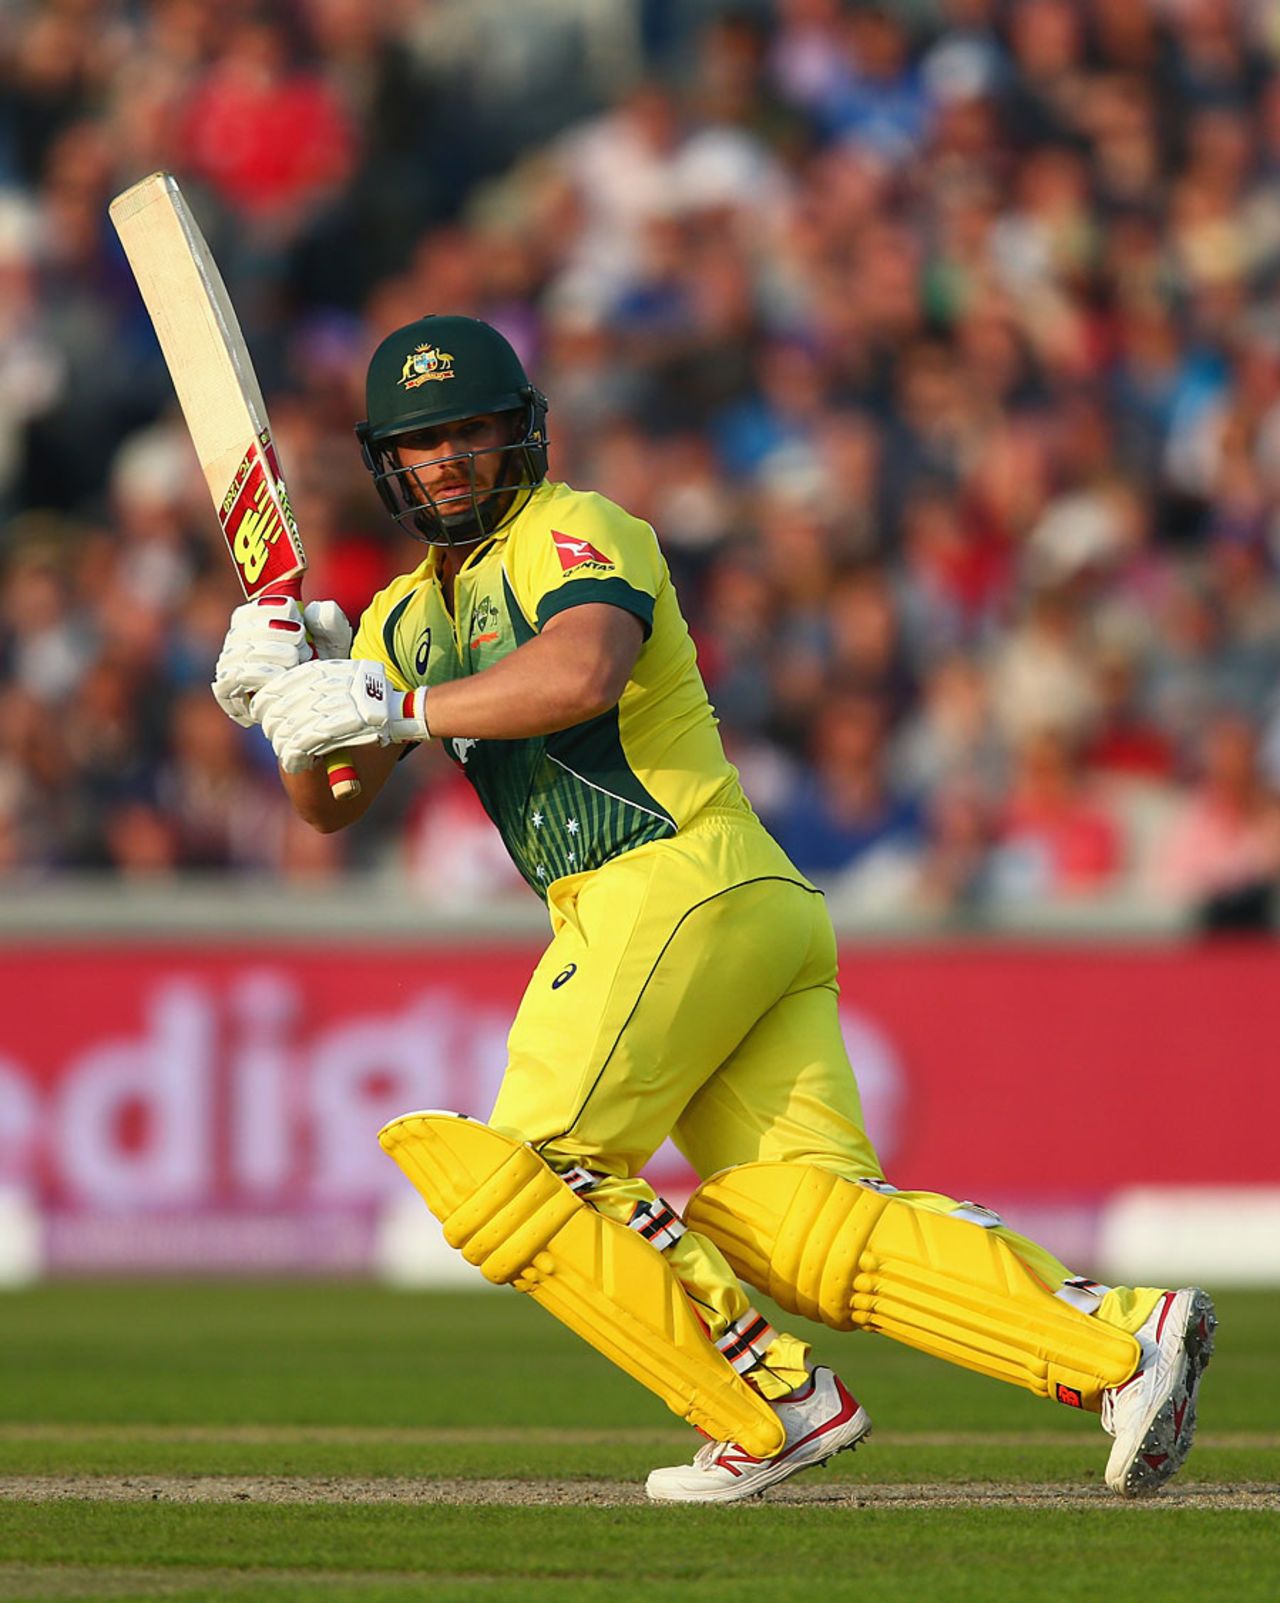 Aaron Finch played confidently for a half-century on his comeback, England v Australia, 3rd ODI, Old Trafford, September 8, 2015